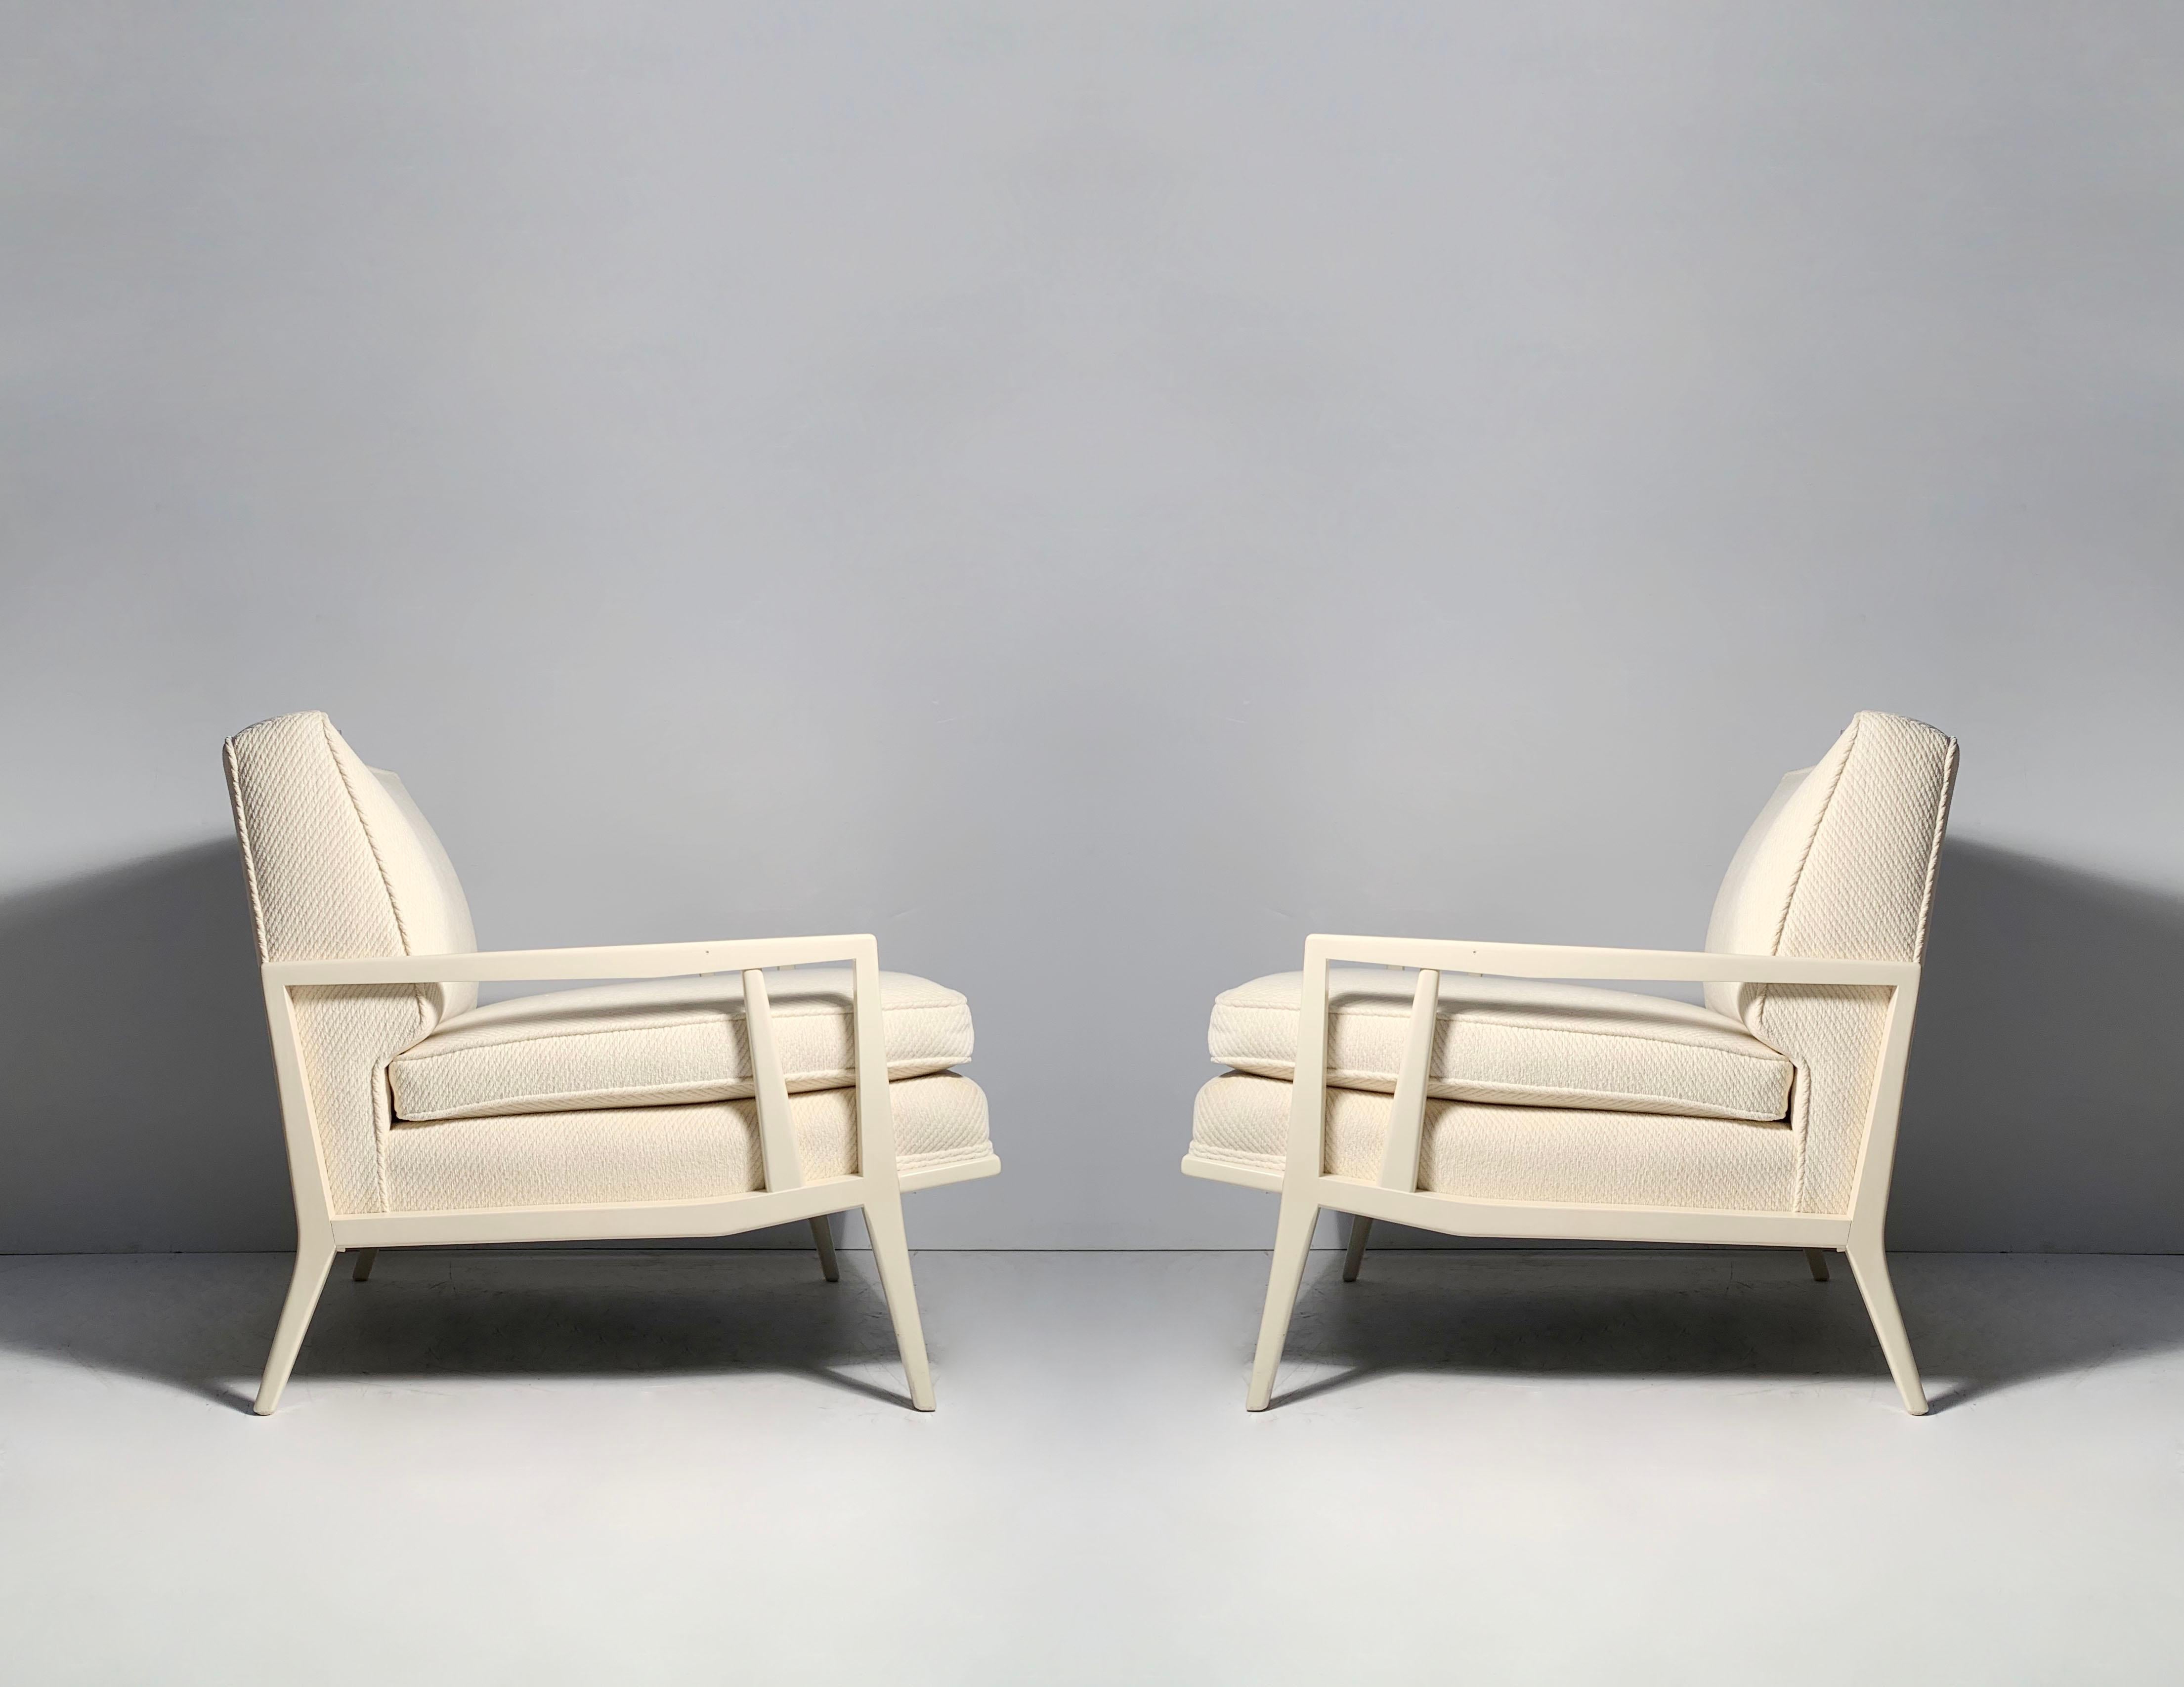 Vintage Paul McCobb Lounge Chairs for Directional. Italian in influence.  

This design was selected by Samuel Marx for the Highland Park Estate of Peggy and Lionel Nathan. Samuel Marx not only designed his own furniture, but also selected designs